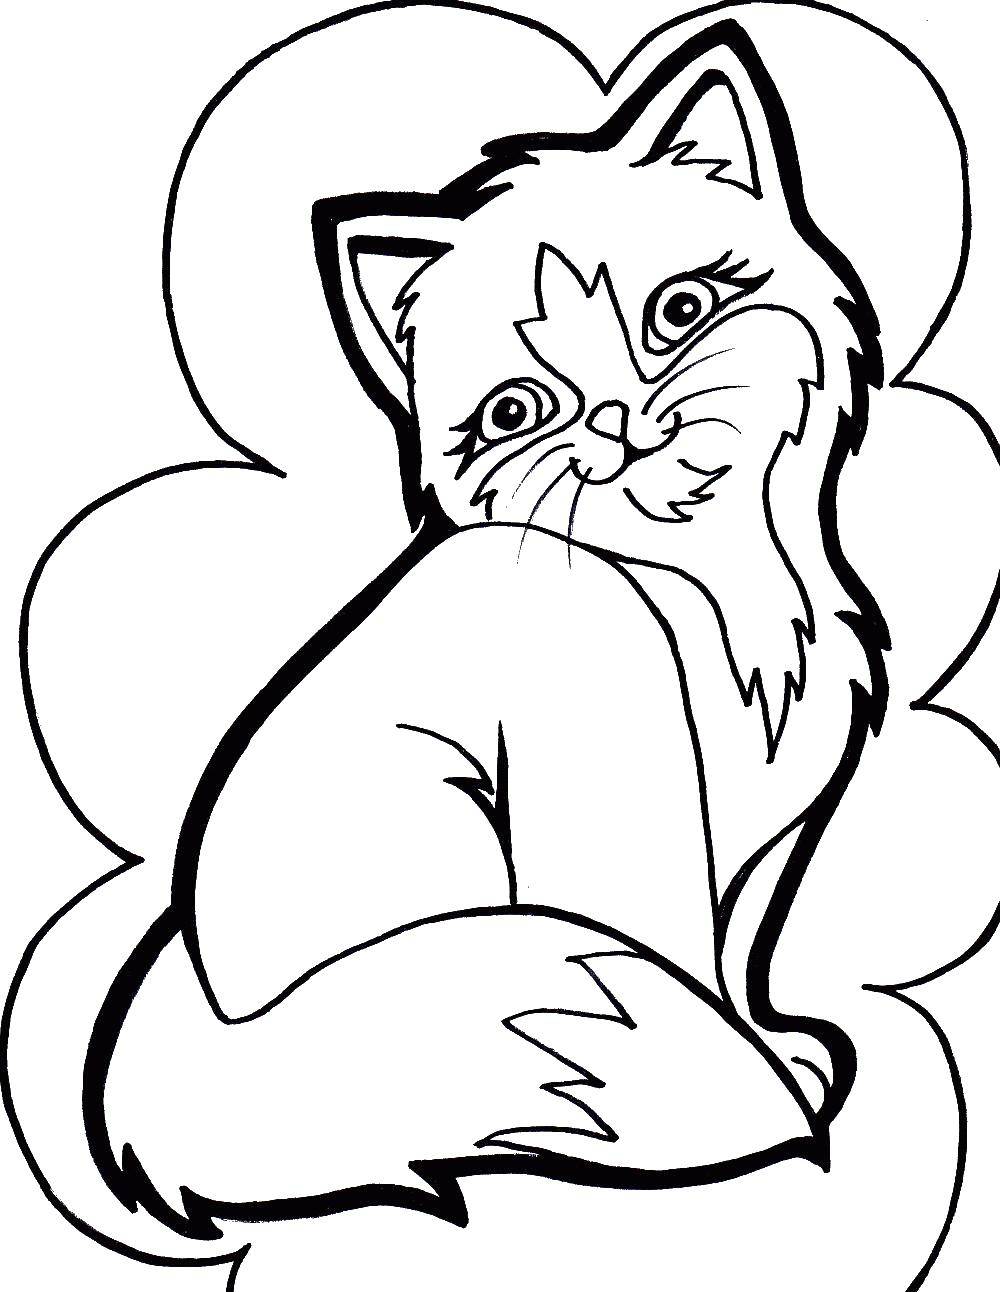 Coloring Kitty. Category The cat. Tags:  cat, cat.